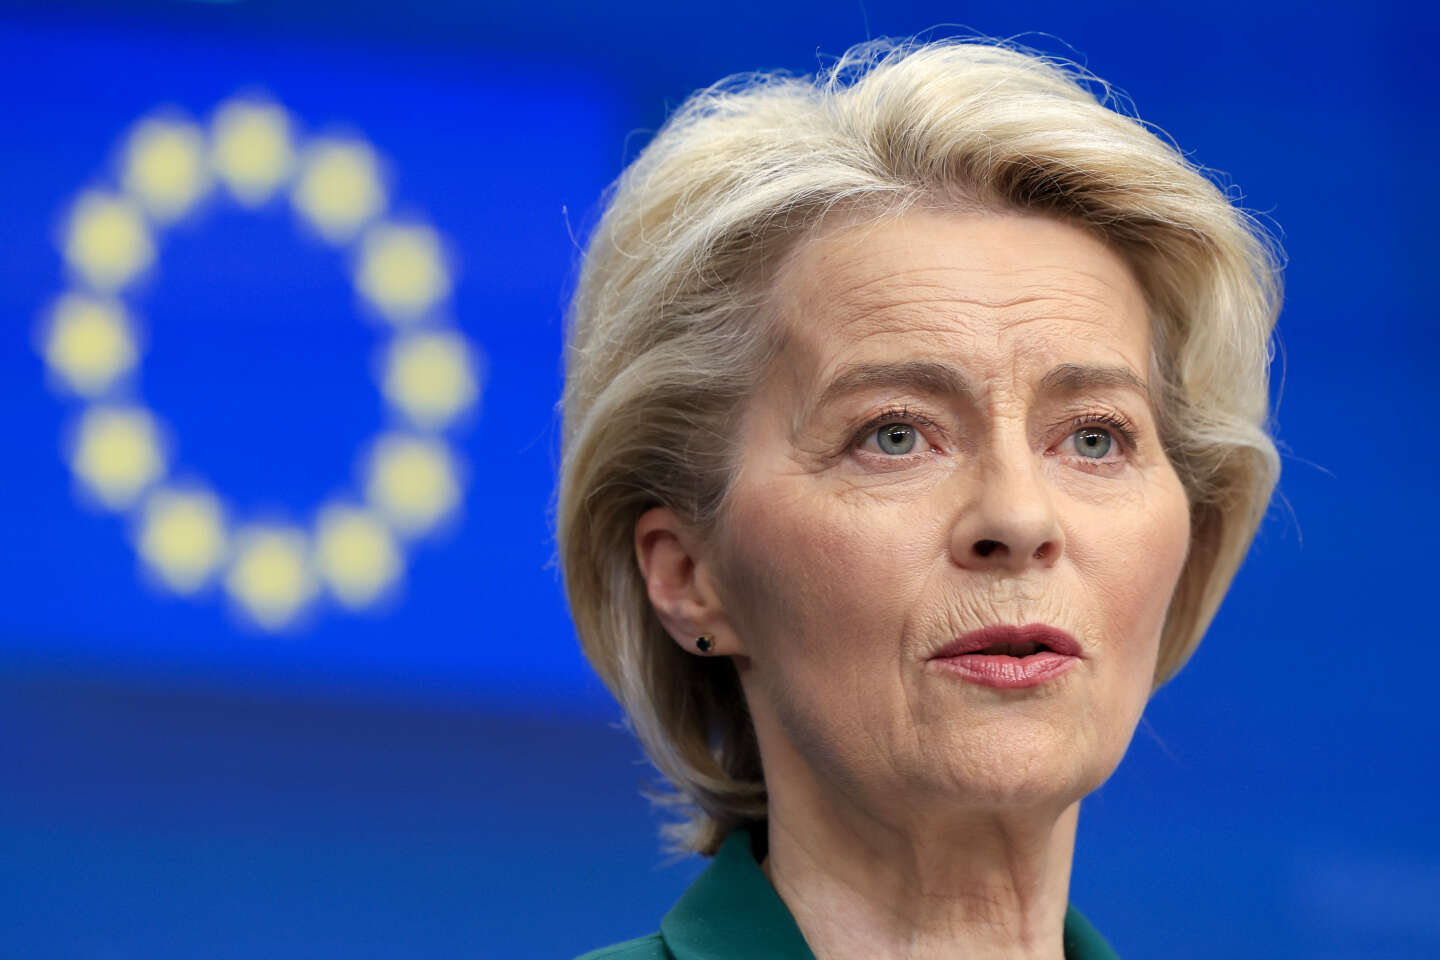 Von der Leyen forced to abandon controversial appointment